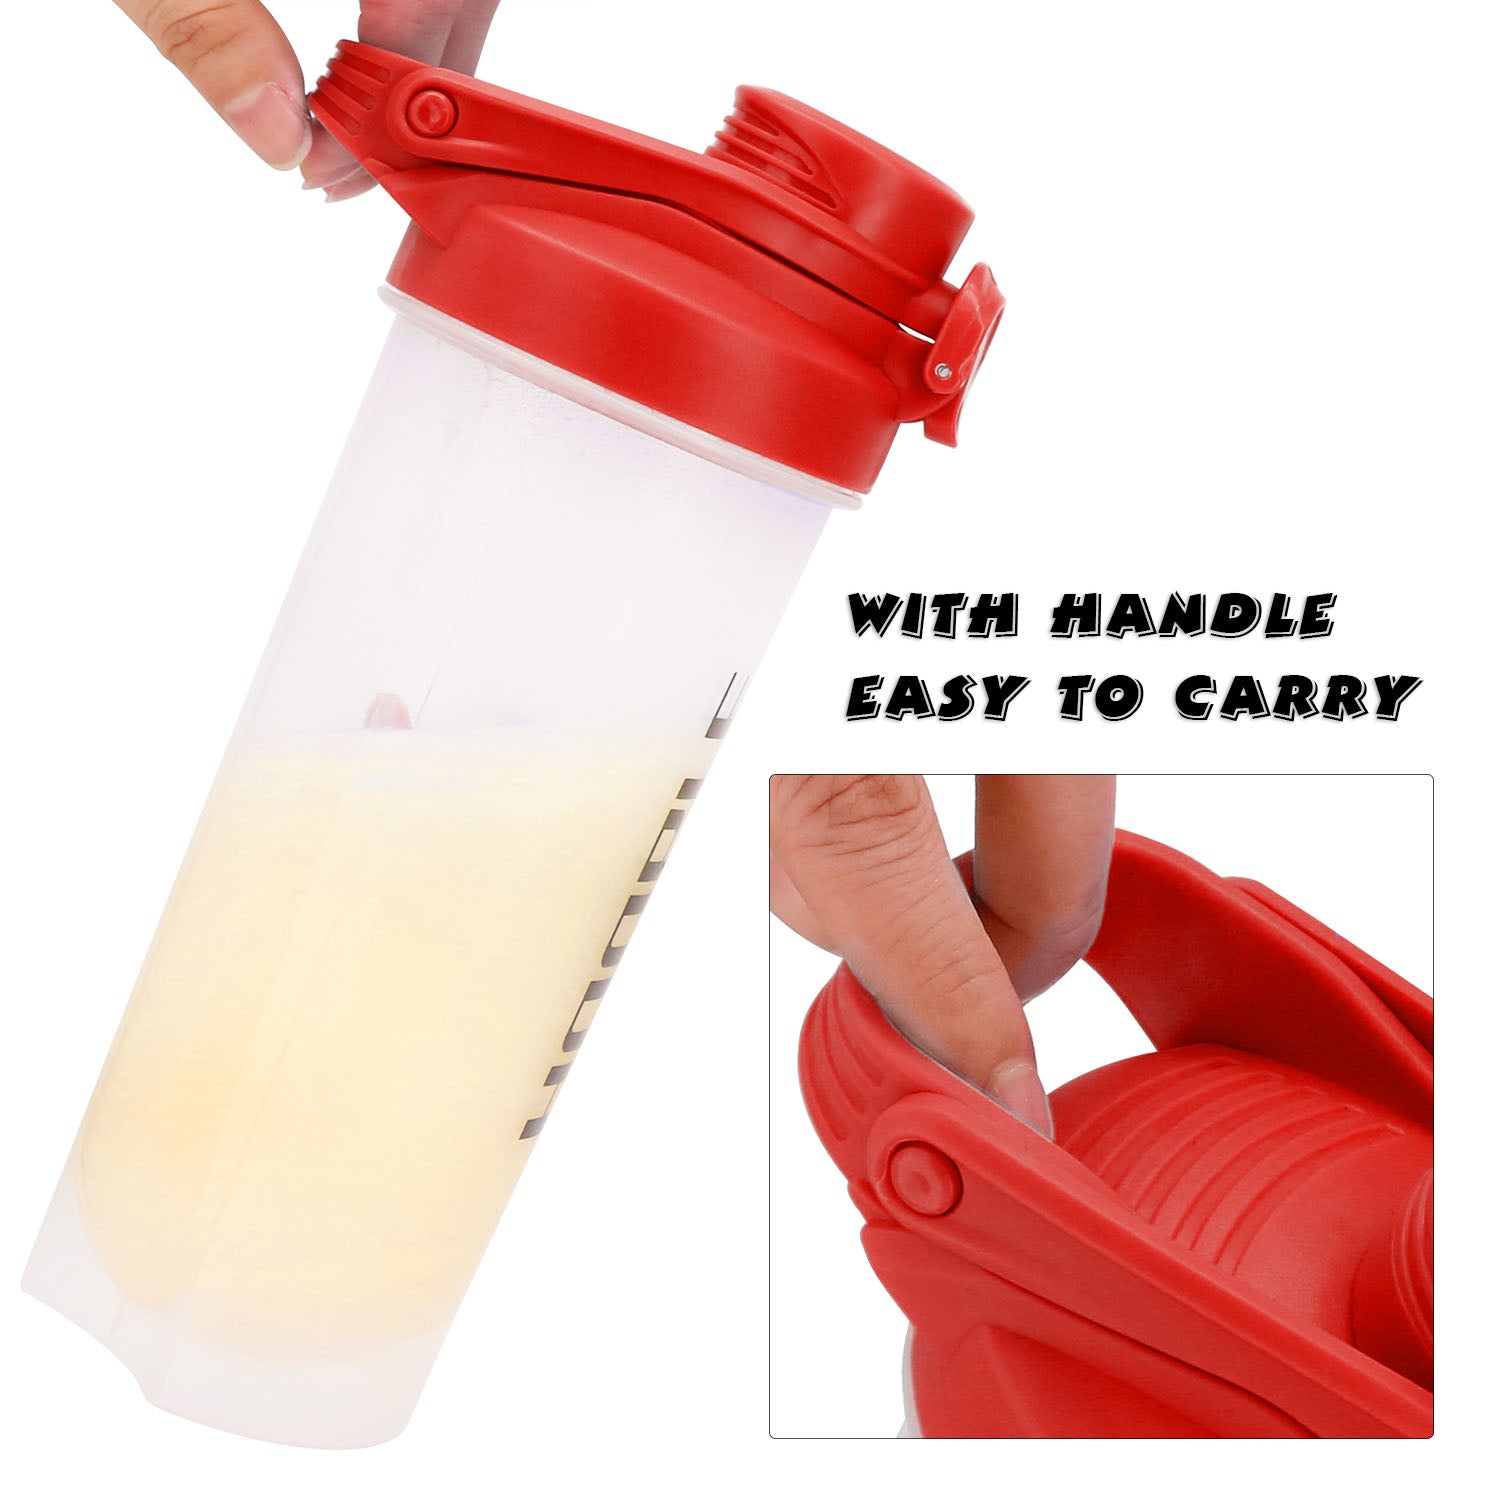 Hoople 24 OZ Shaker Bottle Protein Powder Shake Blender Gym Smoothie Cup, BPA Free, Auto-Flip Leak-Proof Lid, Handle with Ball Included - Red